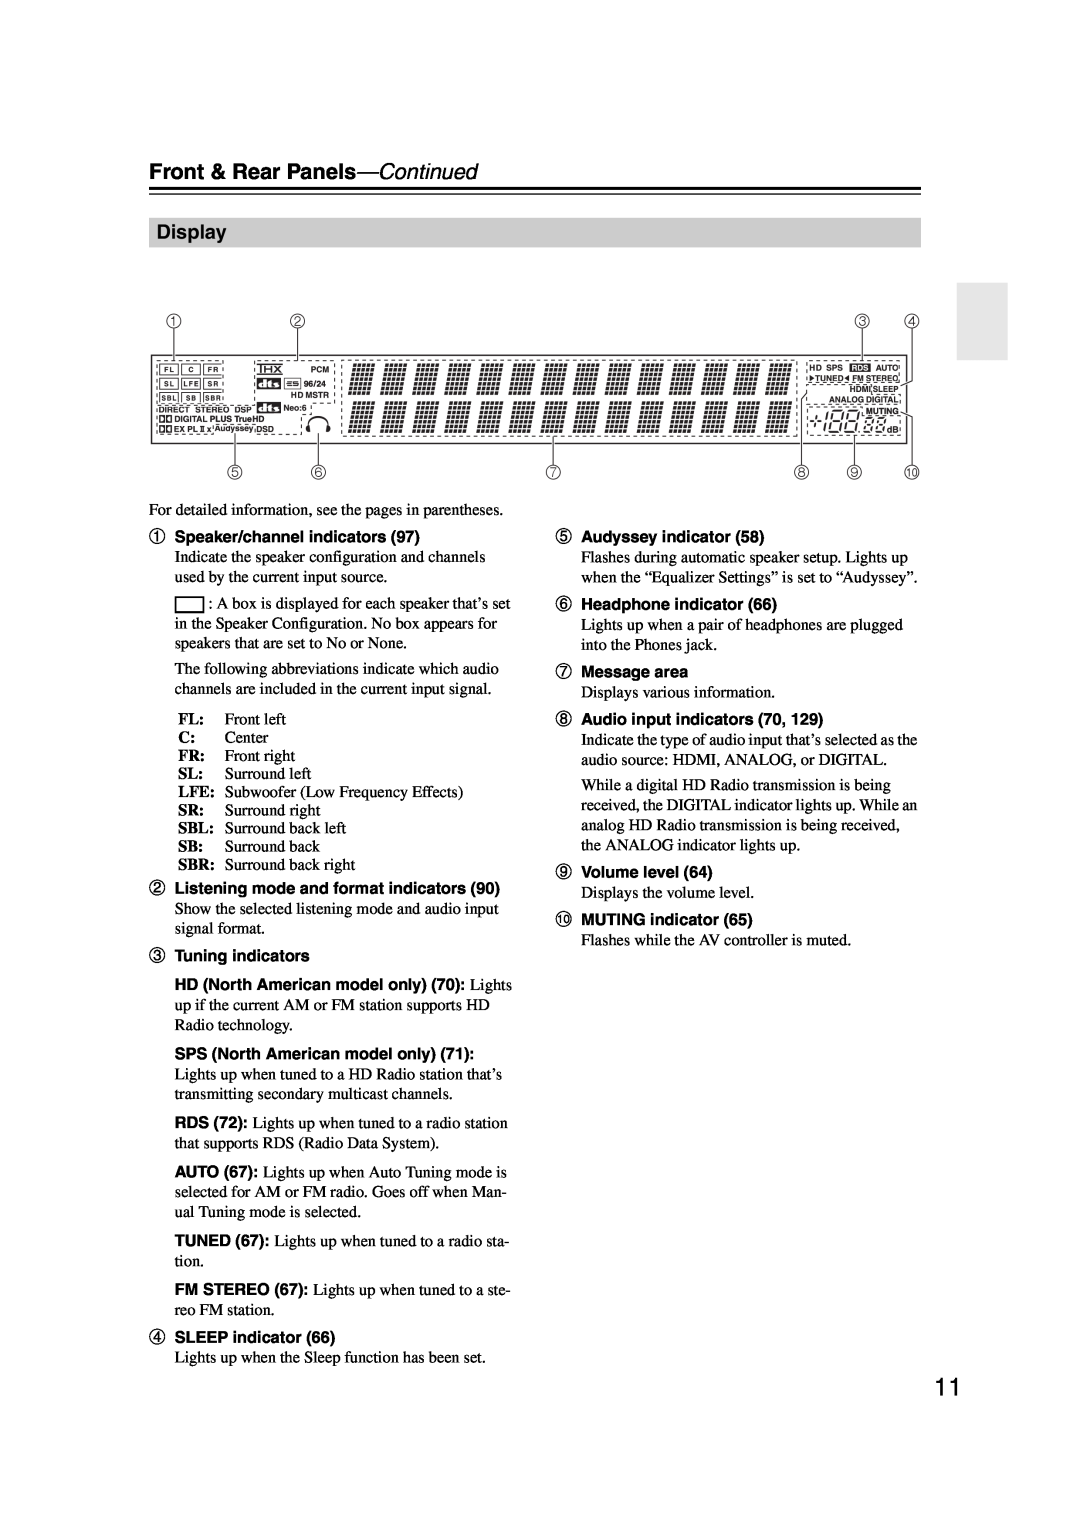 Integra DHC-9.9 instruction manual Display, Front & Rear Panels—Continued, 8 9 bk 